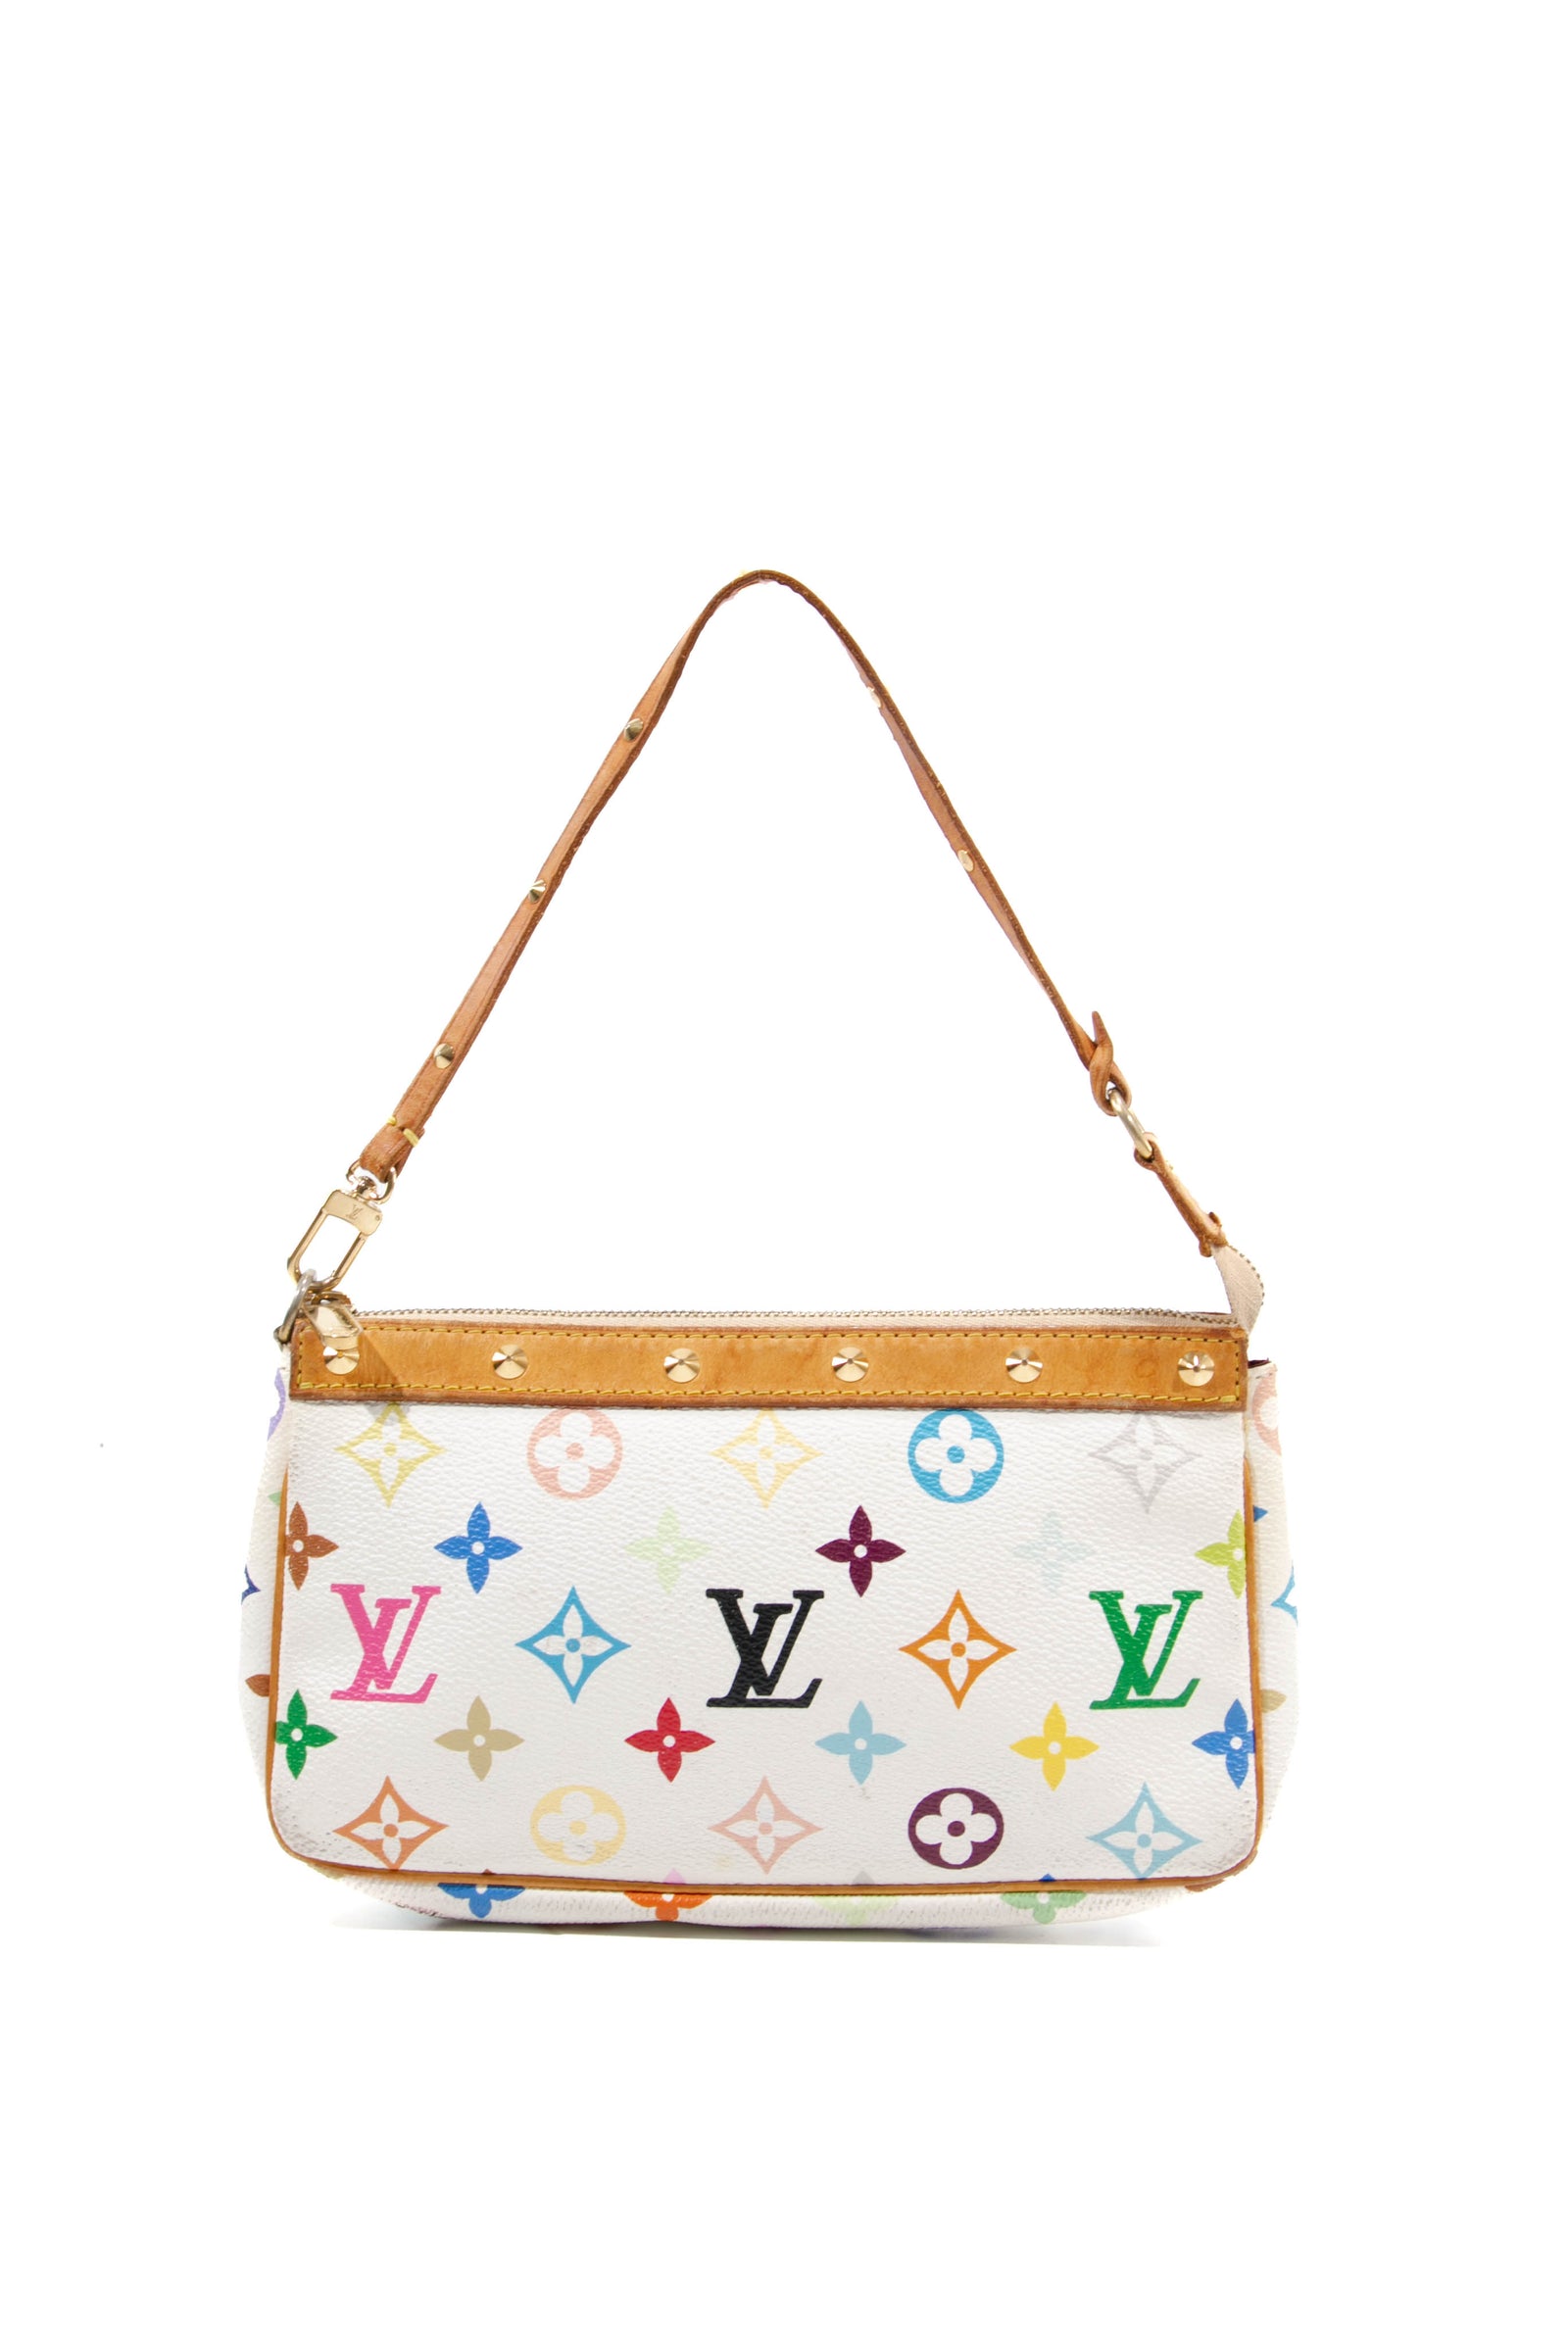 You Can Now Customize Louis Vuitton's Coveted Multi Pochette